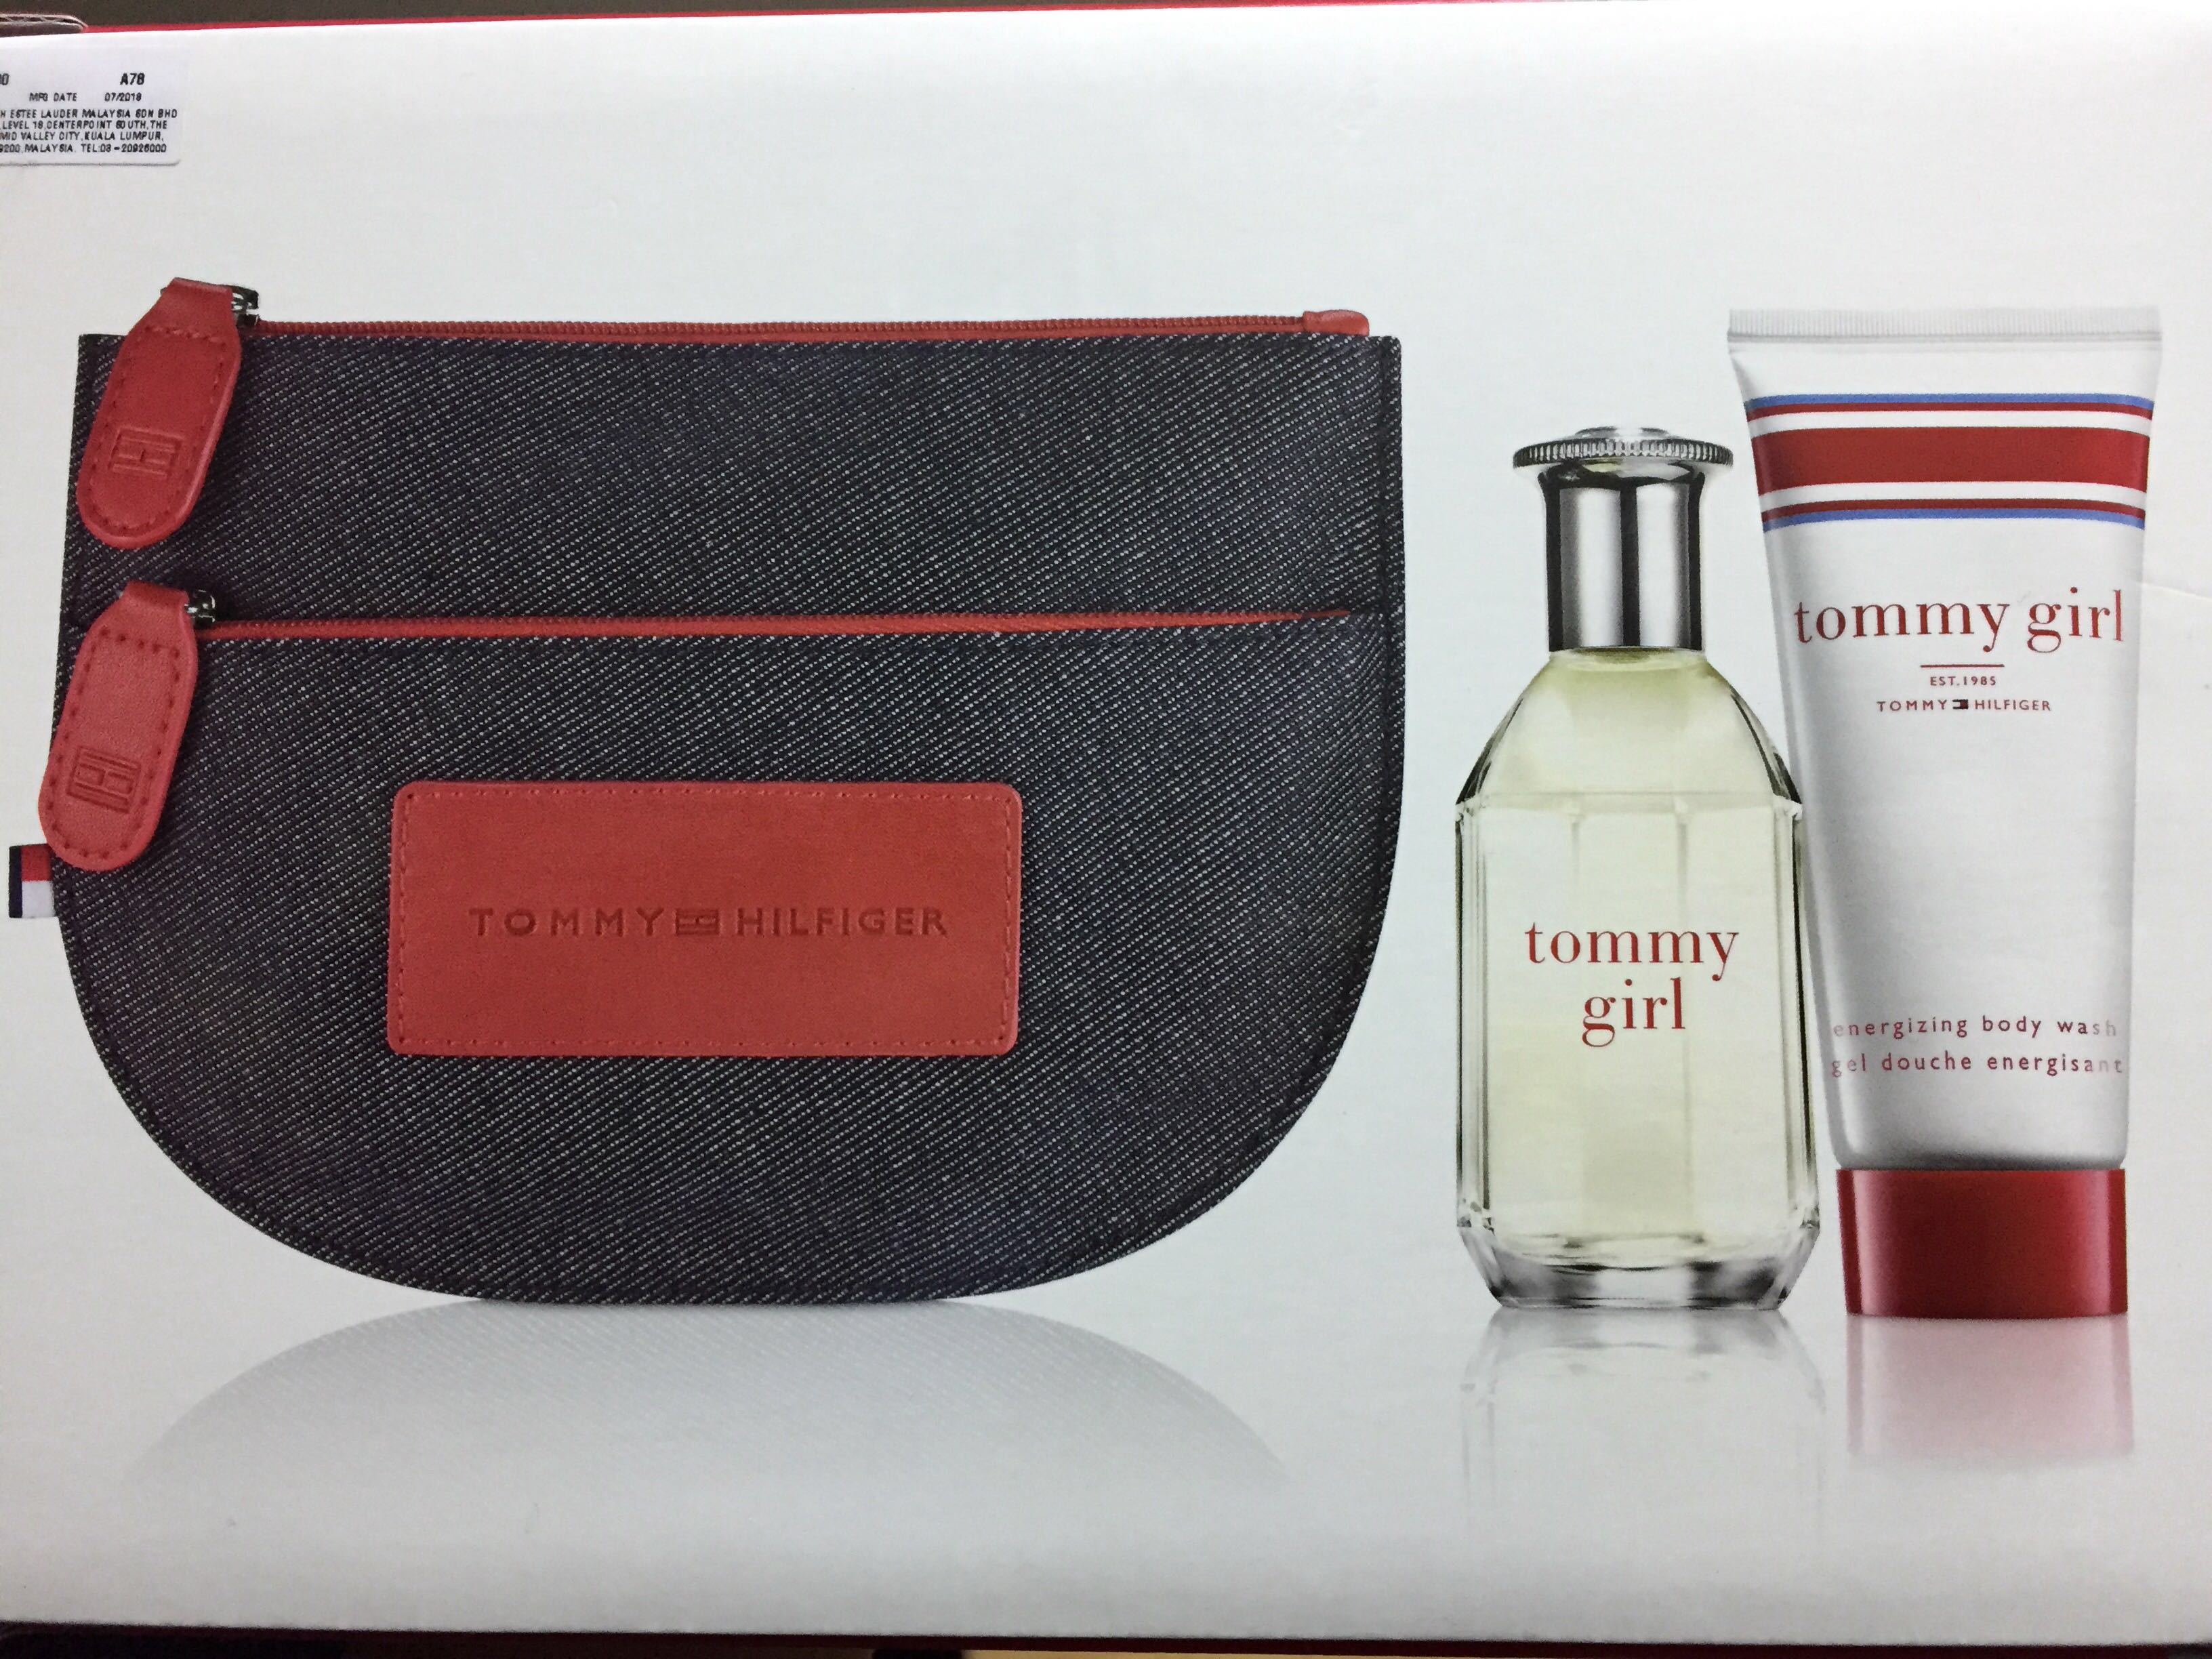 tommy girl perfume and lotion set